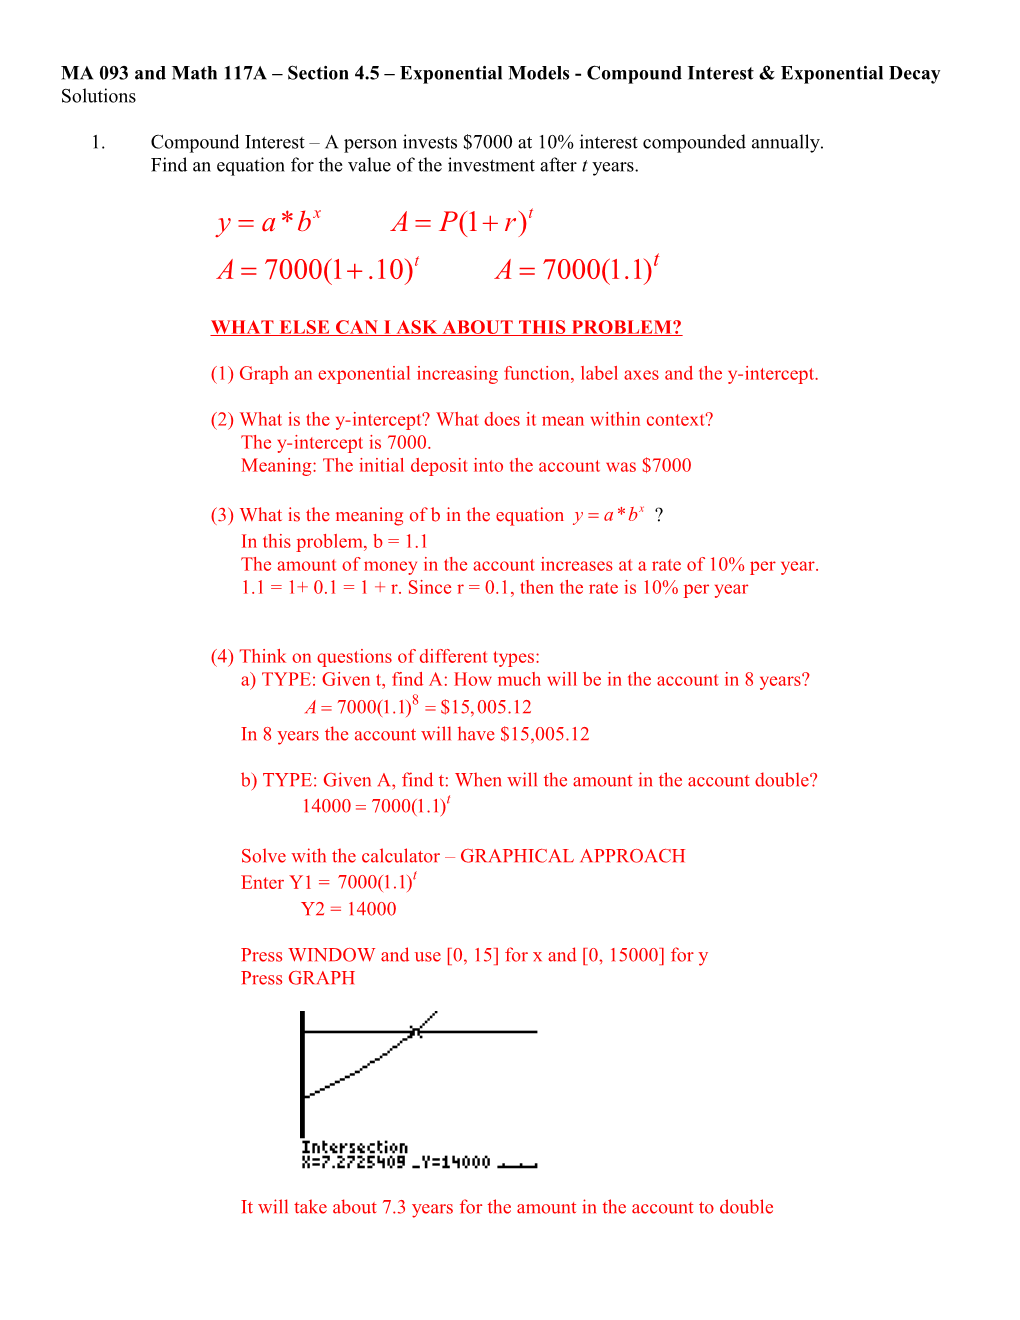 MA 093 and Math 117A Section 4.5 Exponential Models - Compound Interest & Exponential Decay